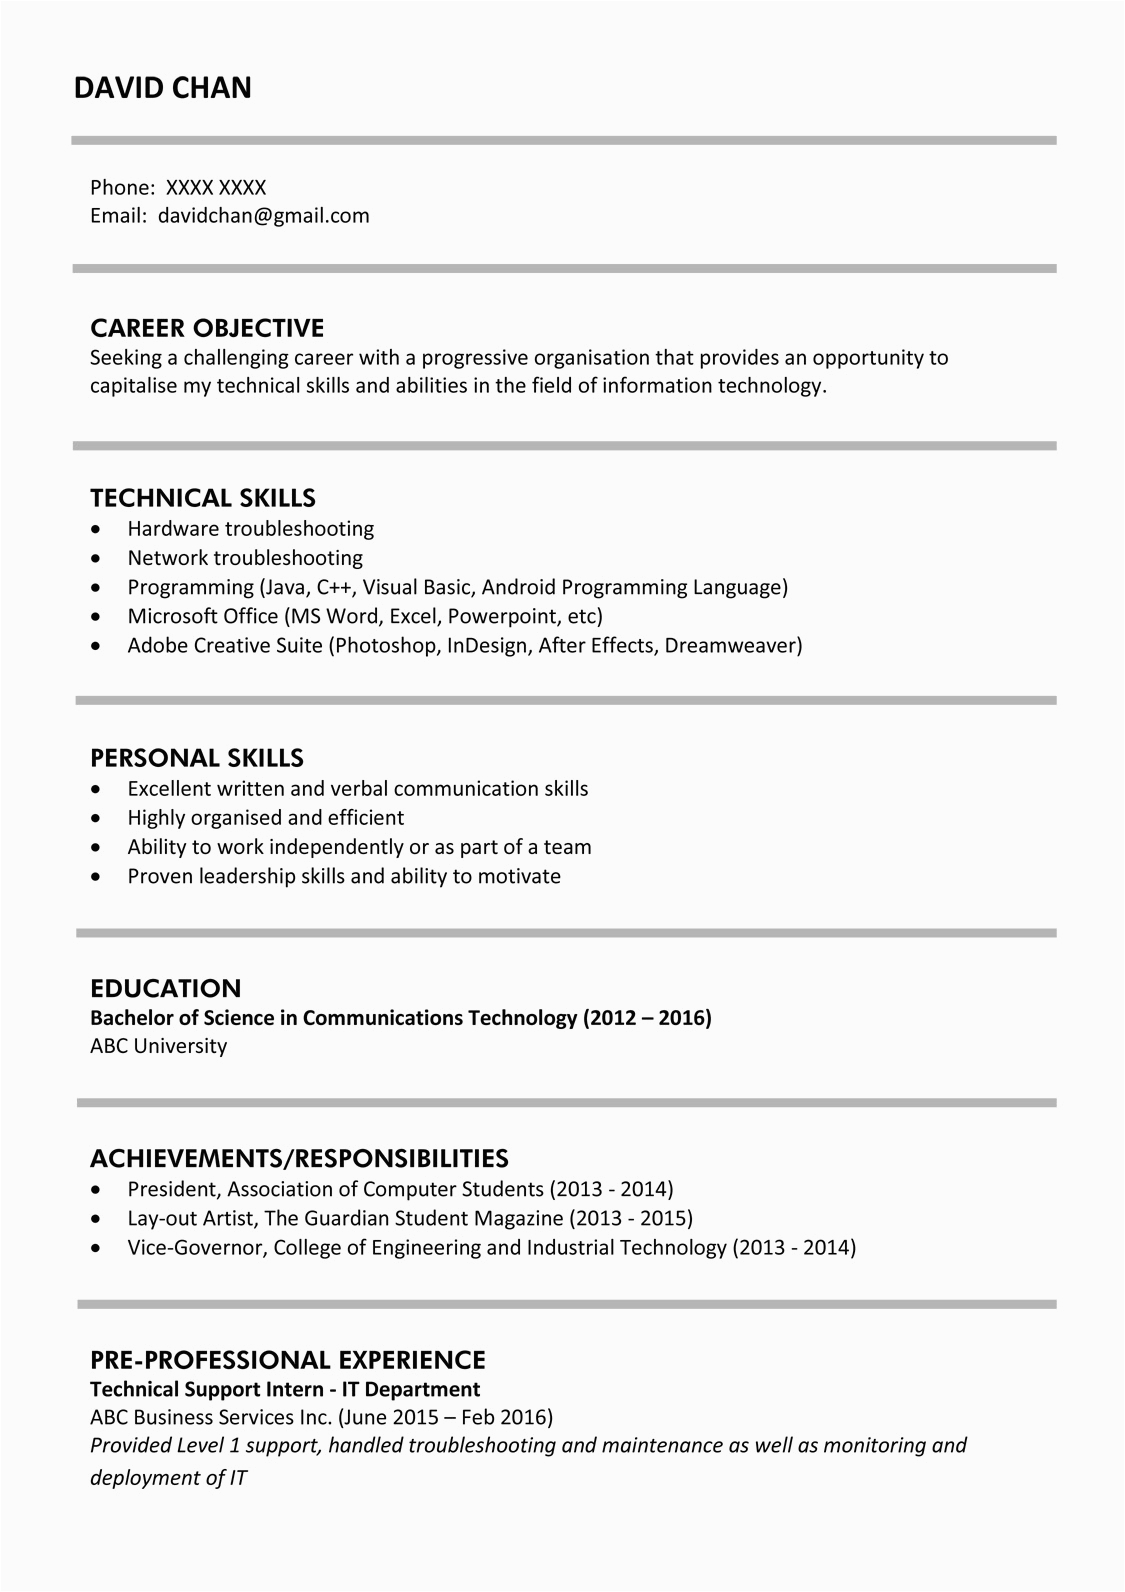 Resume Sample for Fresh Graduate without Experience Resume Example for Fresh Graduate without Experience